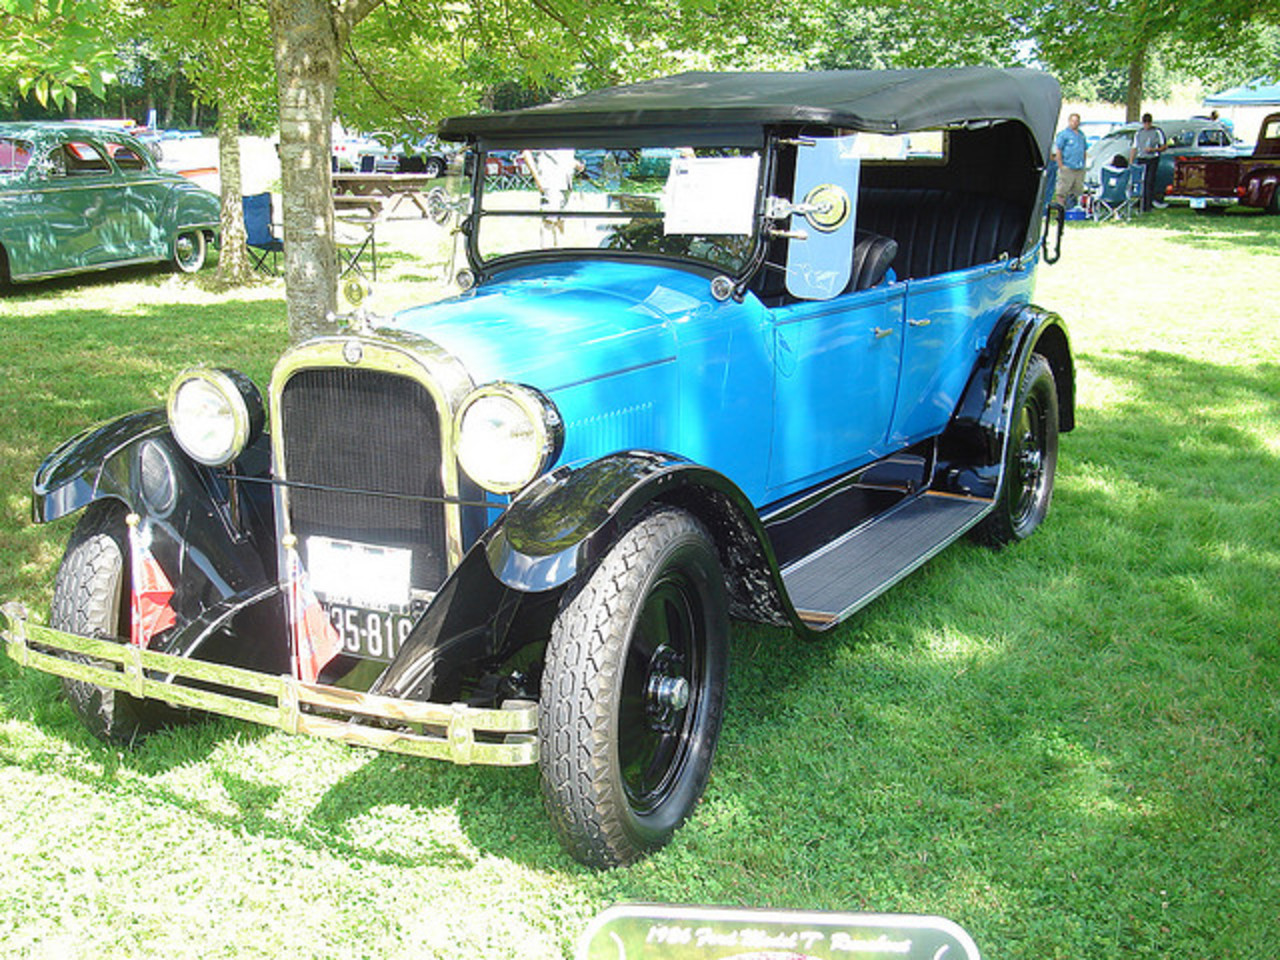 1924 Dodge Brothers Touring Car | Flickr - Photo Sharing!